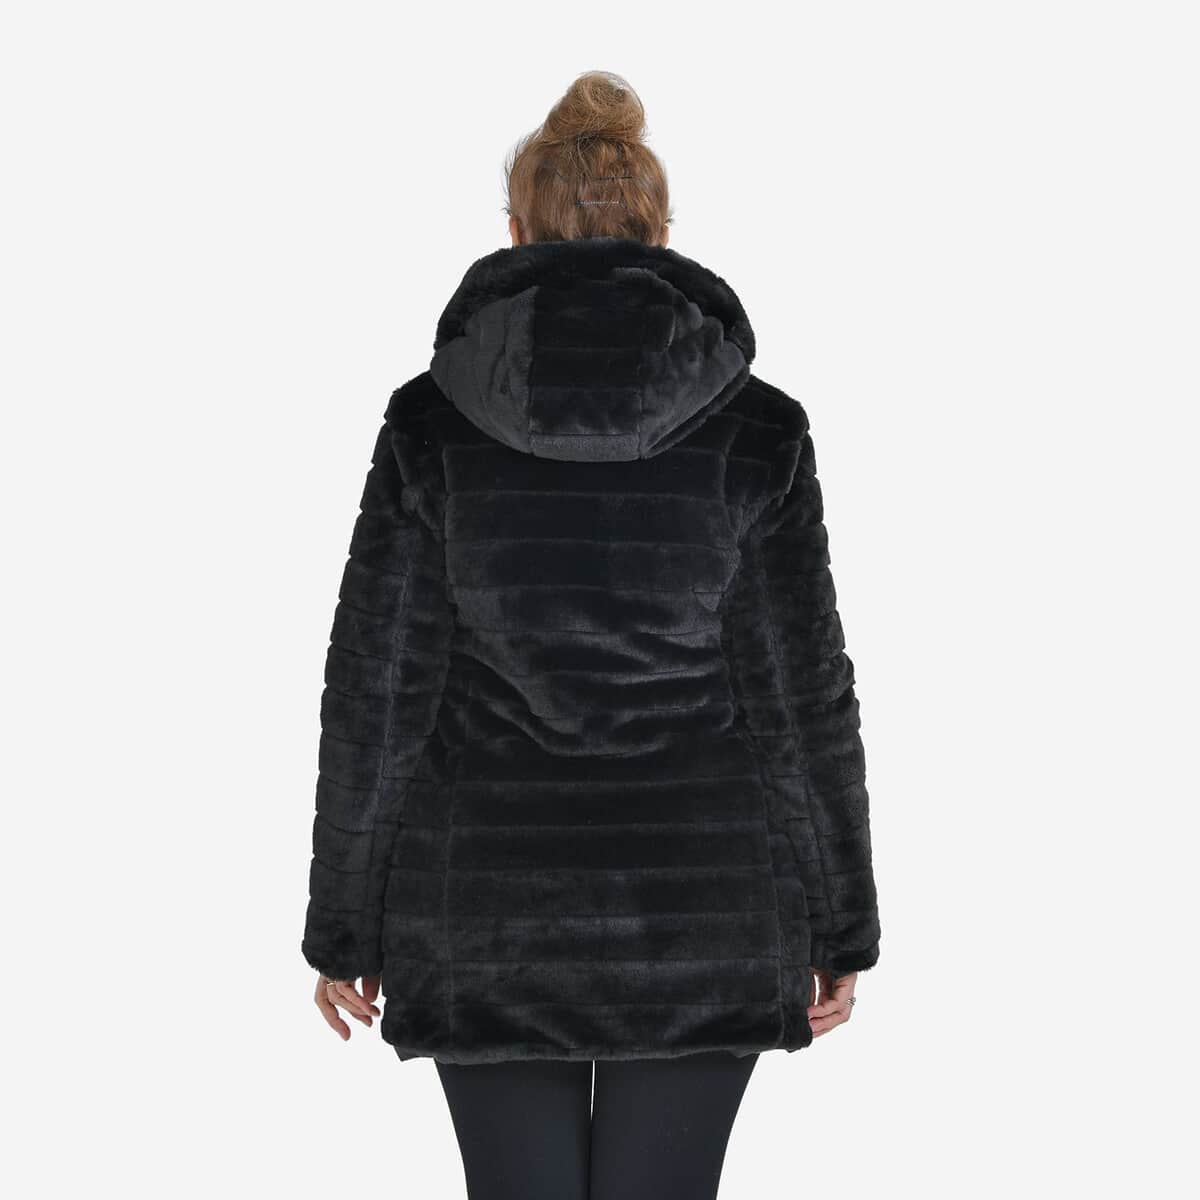 Tamsy Black Reversible Faux Fur and Puffer Jacket with Hood - M image number 6